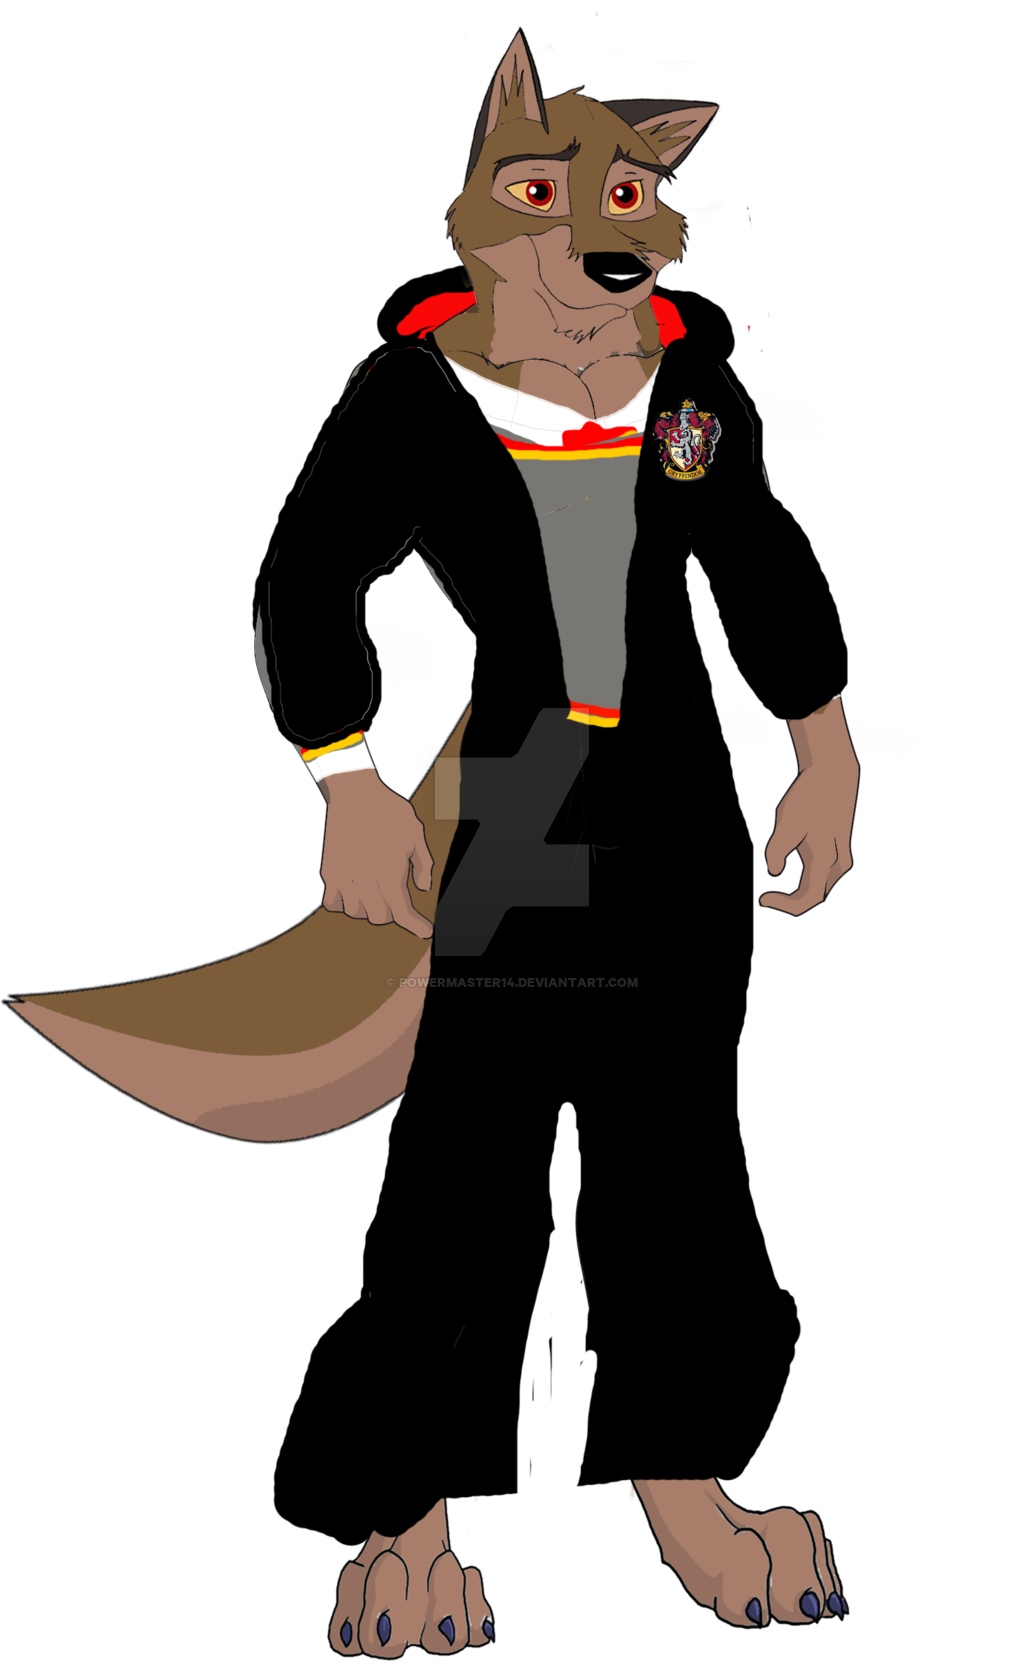 Balto s gryffindor by. King clipart robe